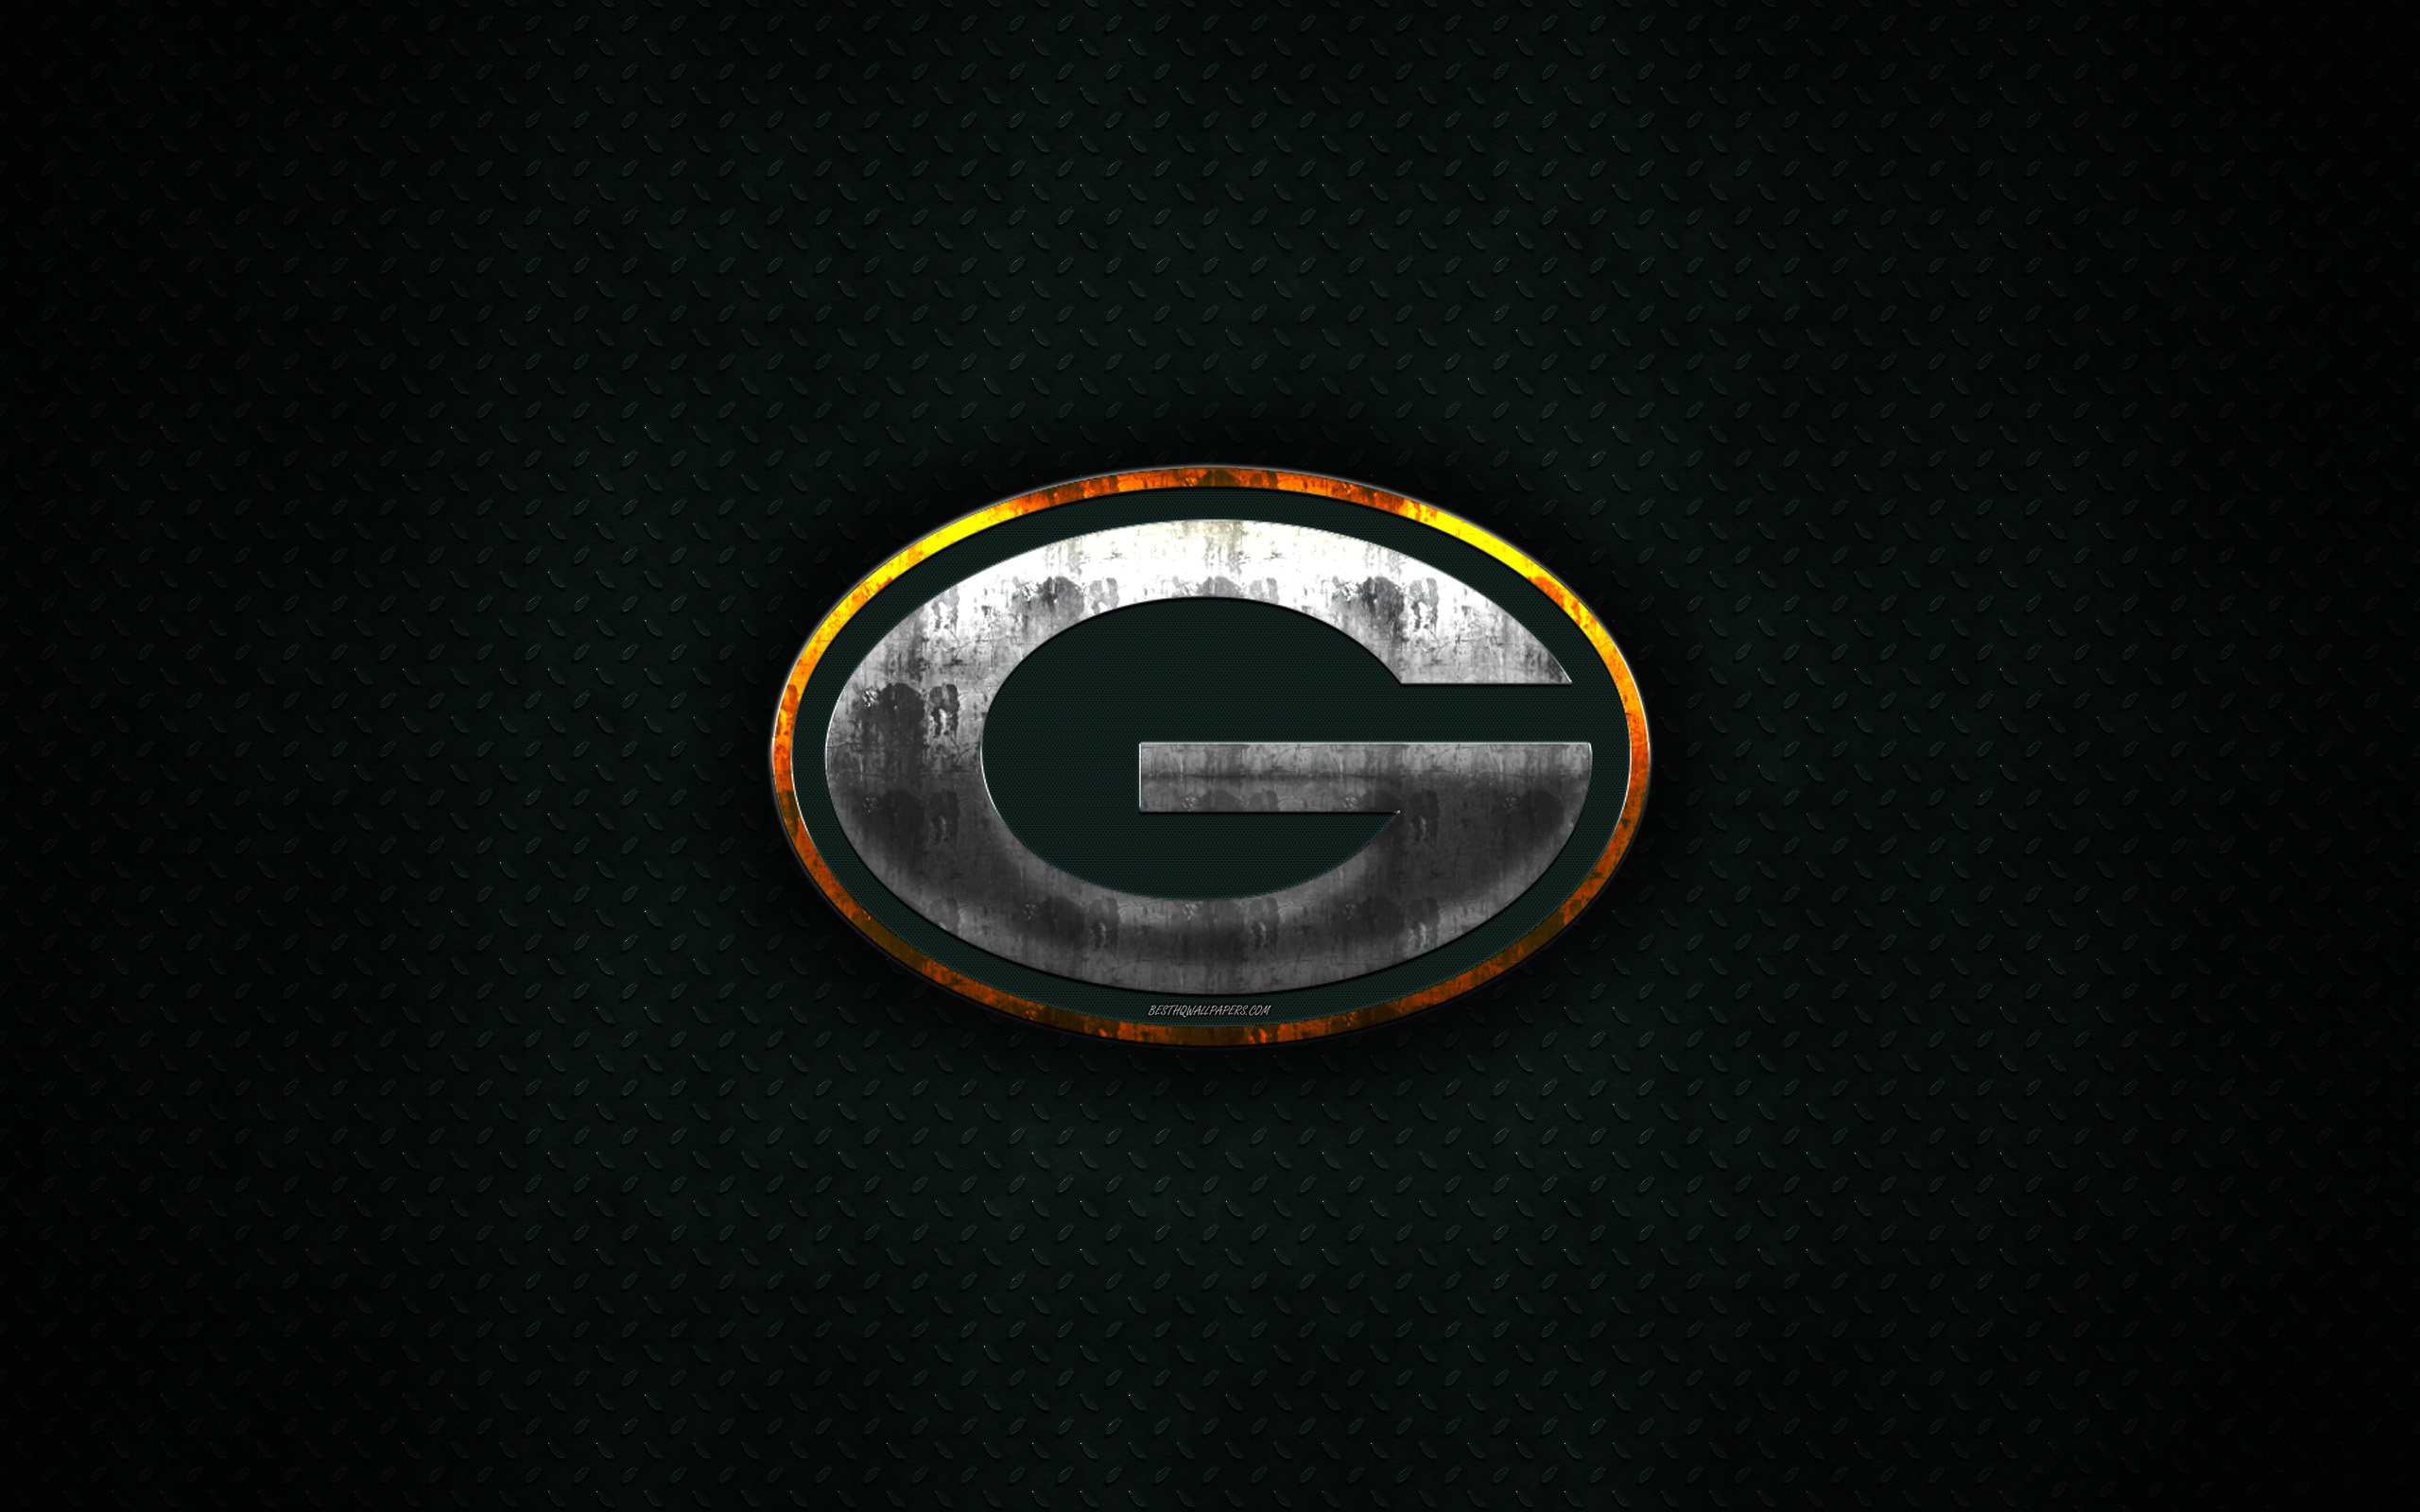 Green Bay Packers: The only non-profit, community-owned major league professional sports team based in the United States. 2560x1600 HD Wallpaper.